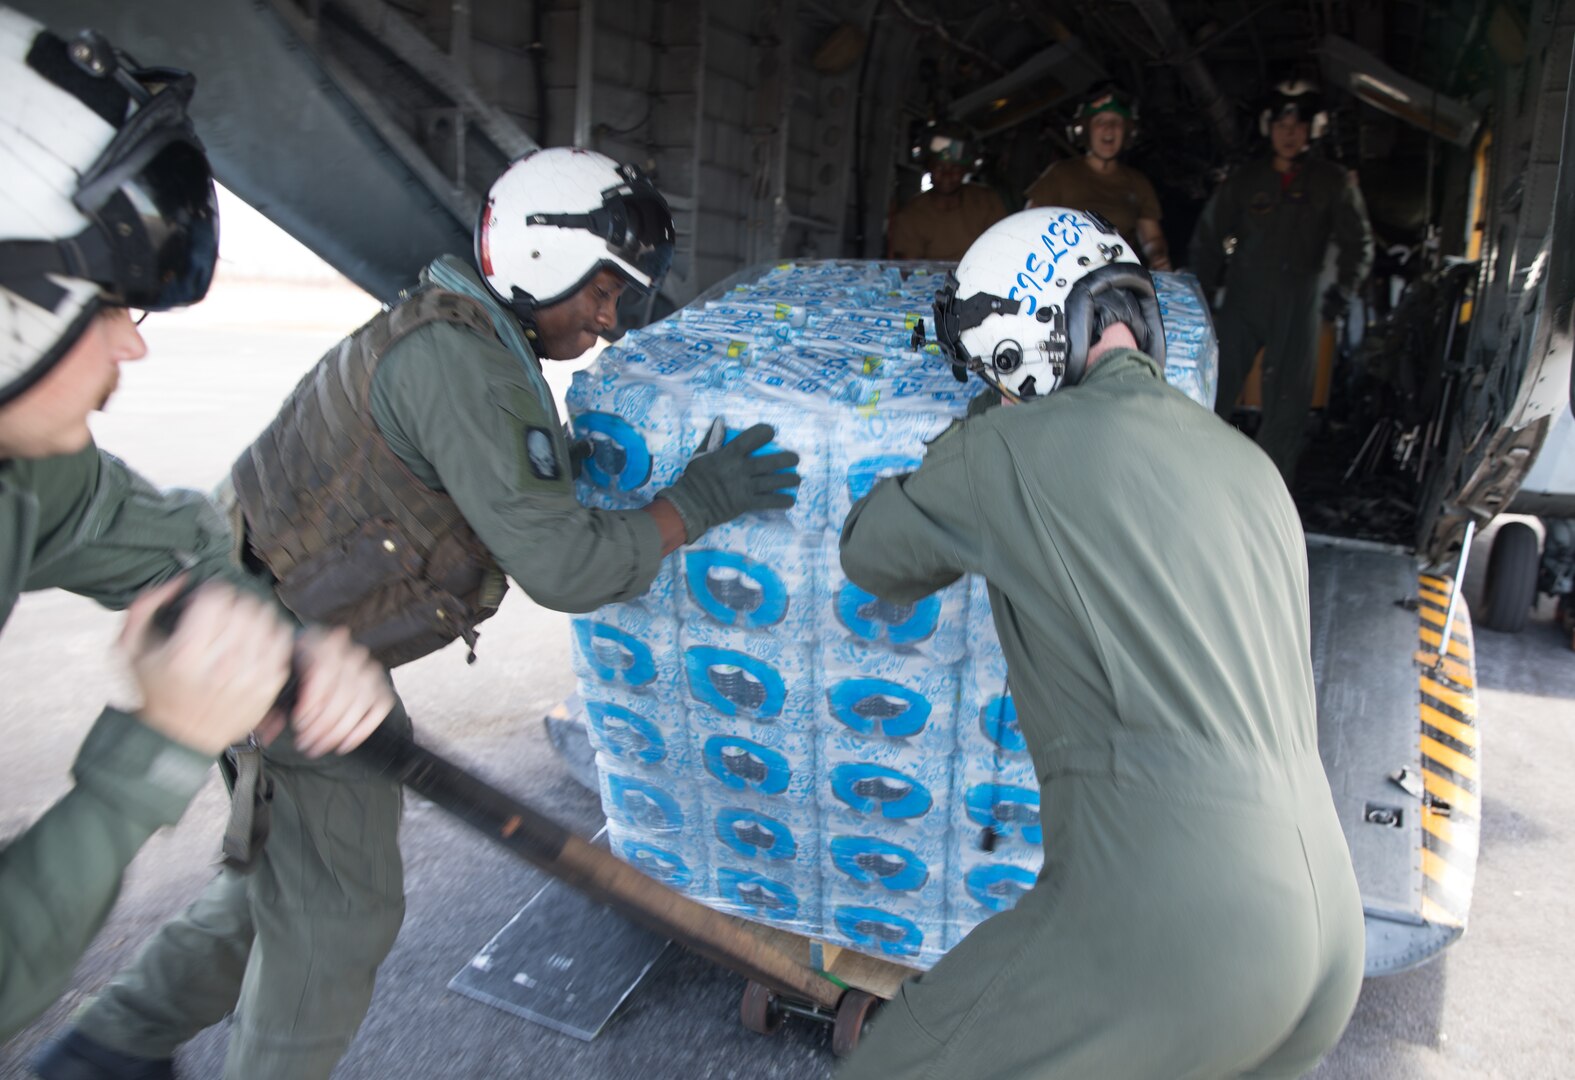 Service members remove a pallet of water from the back of an aircraft.